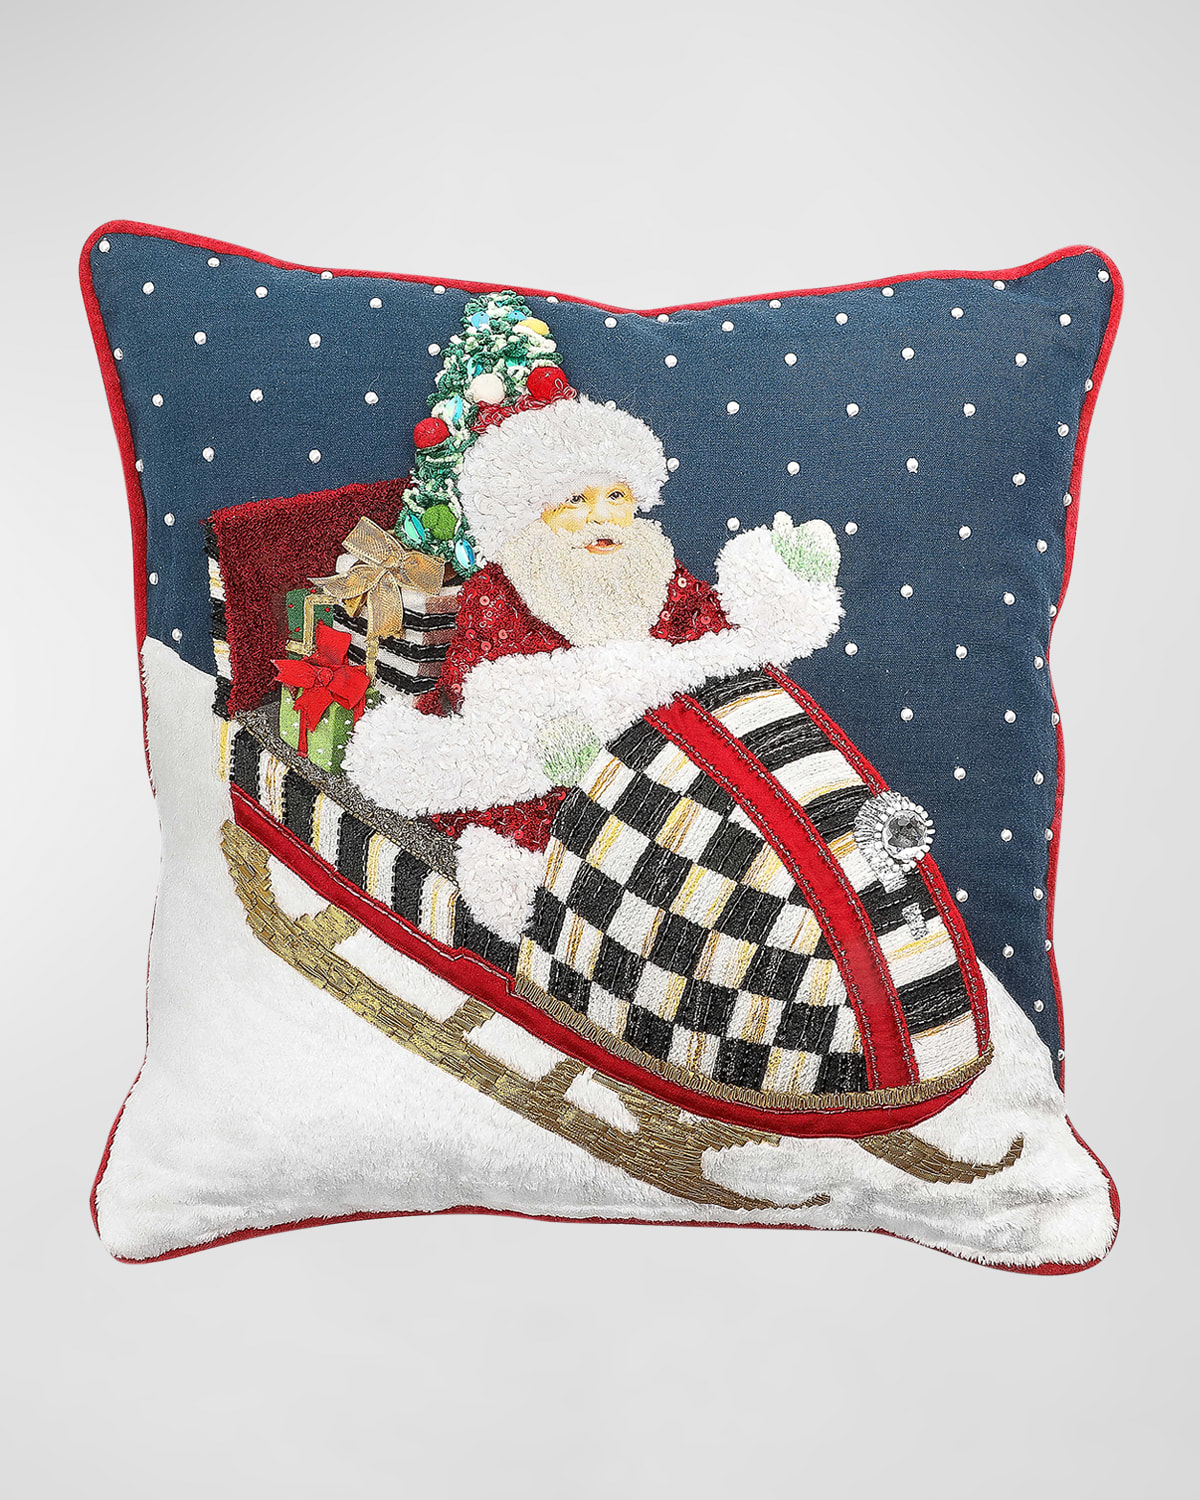 MacKenzie-Childs  Courtly Check Ruffled Square Throw Pillow